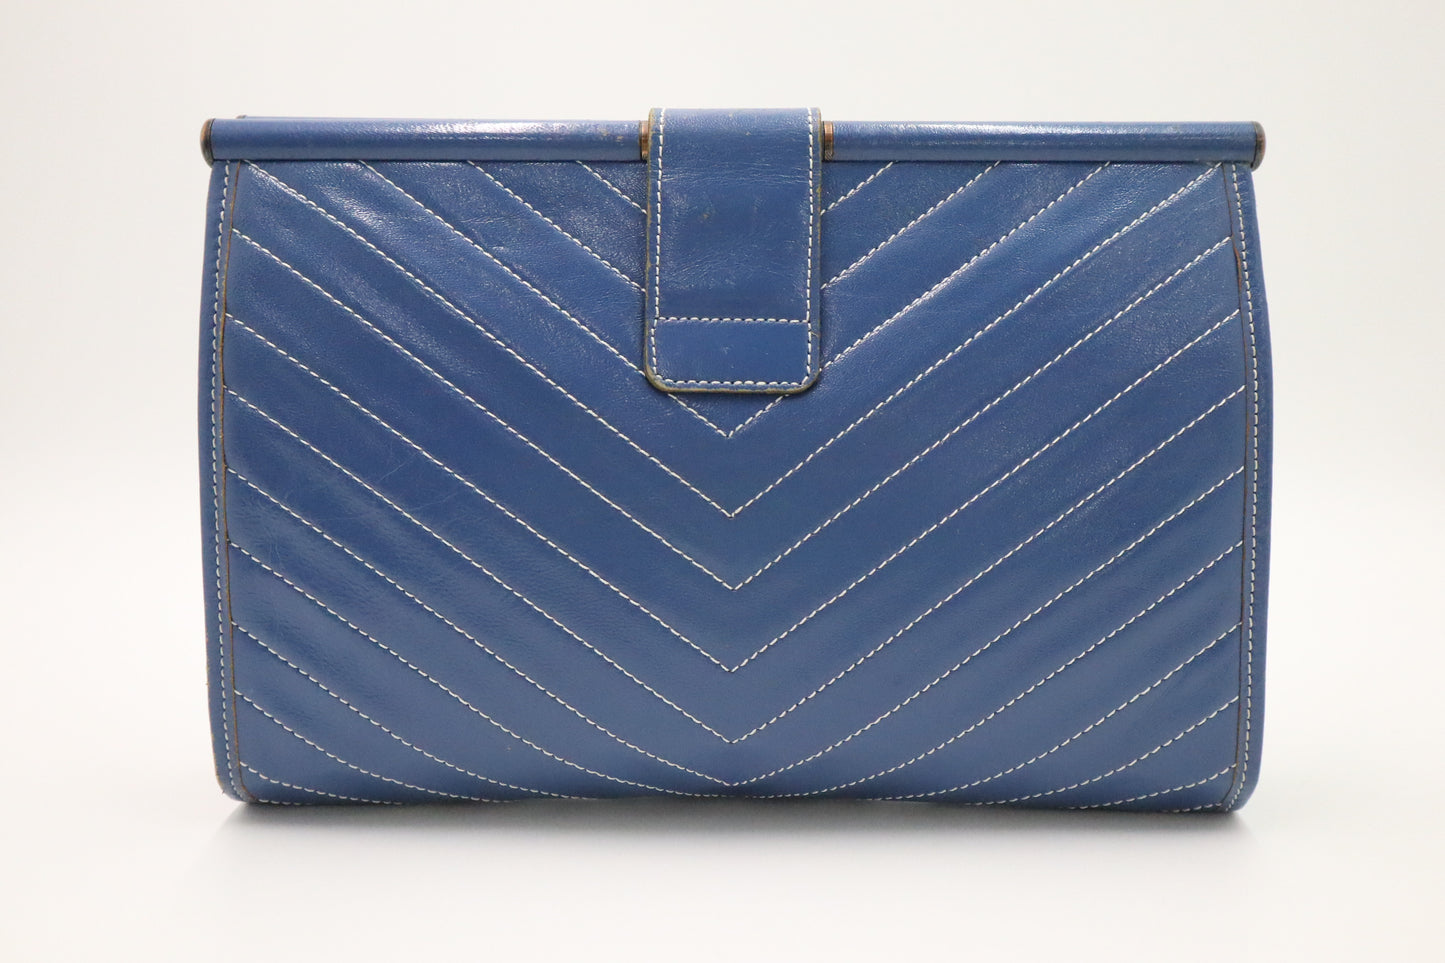 YSL Saint Laurent Clutch in Blue Leather